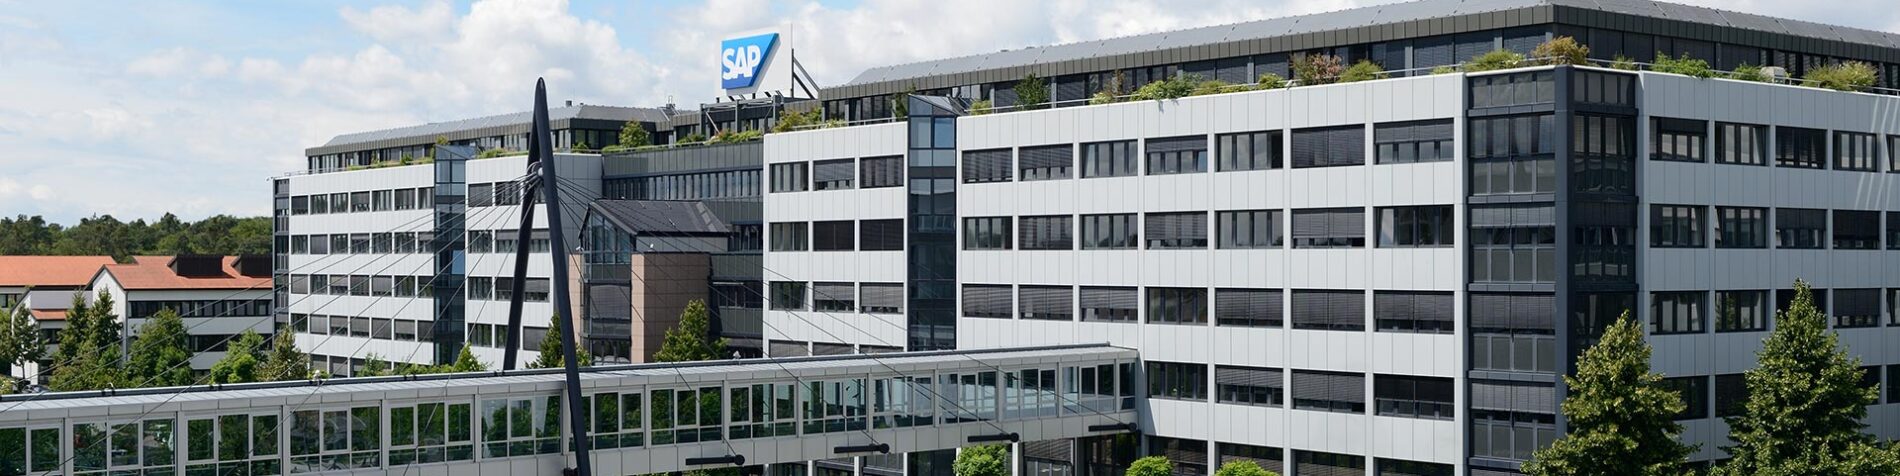 SAP to Release Fourth Quarter and Year-End 2018 Results